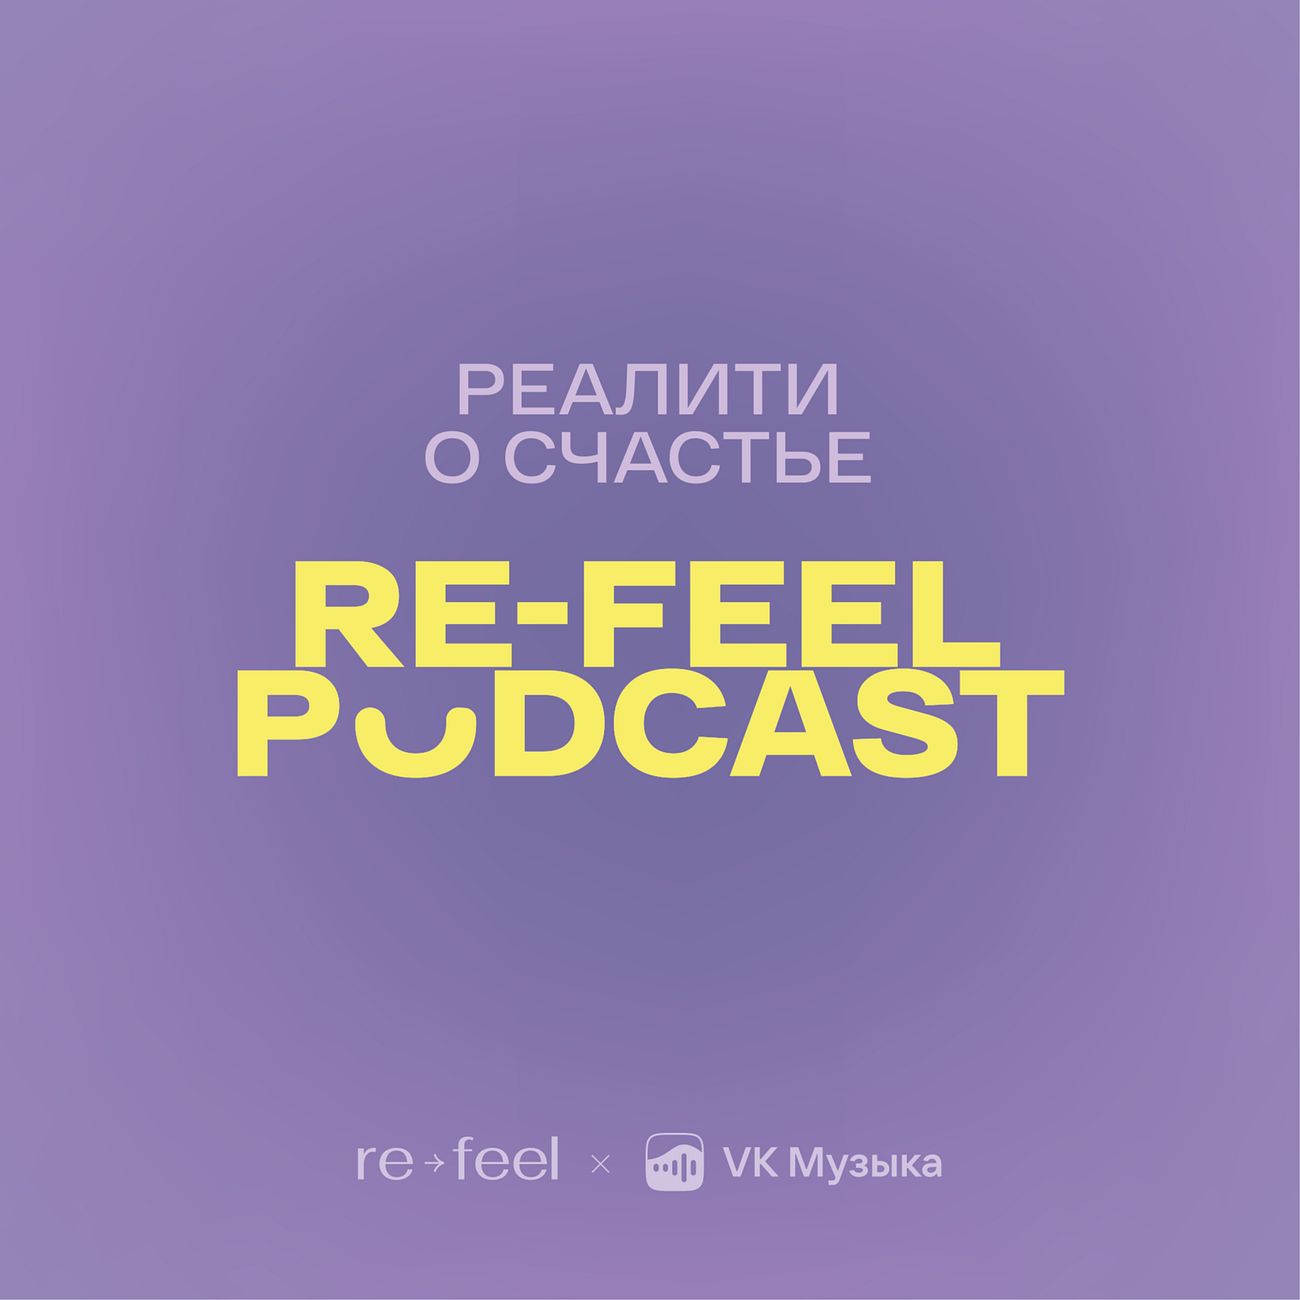 re-feel podcast